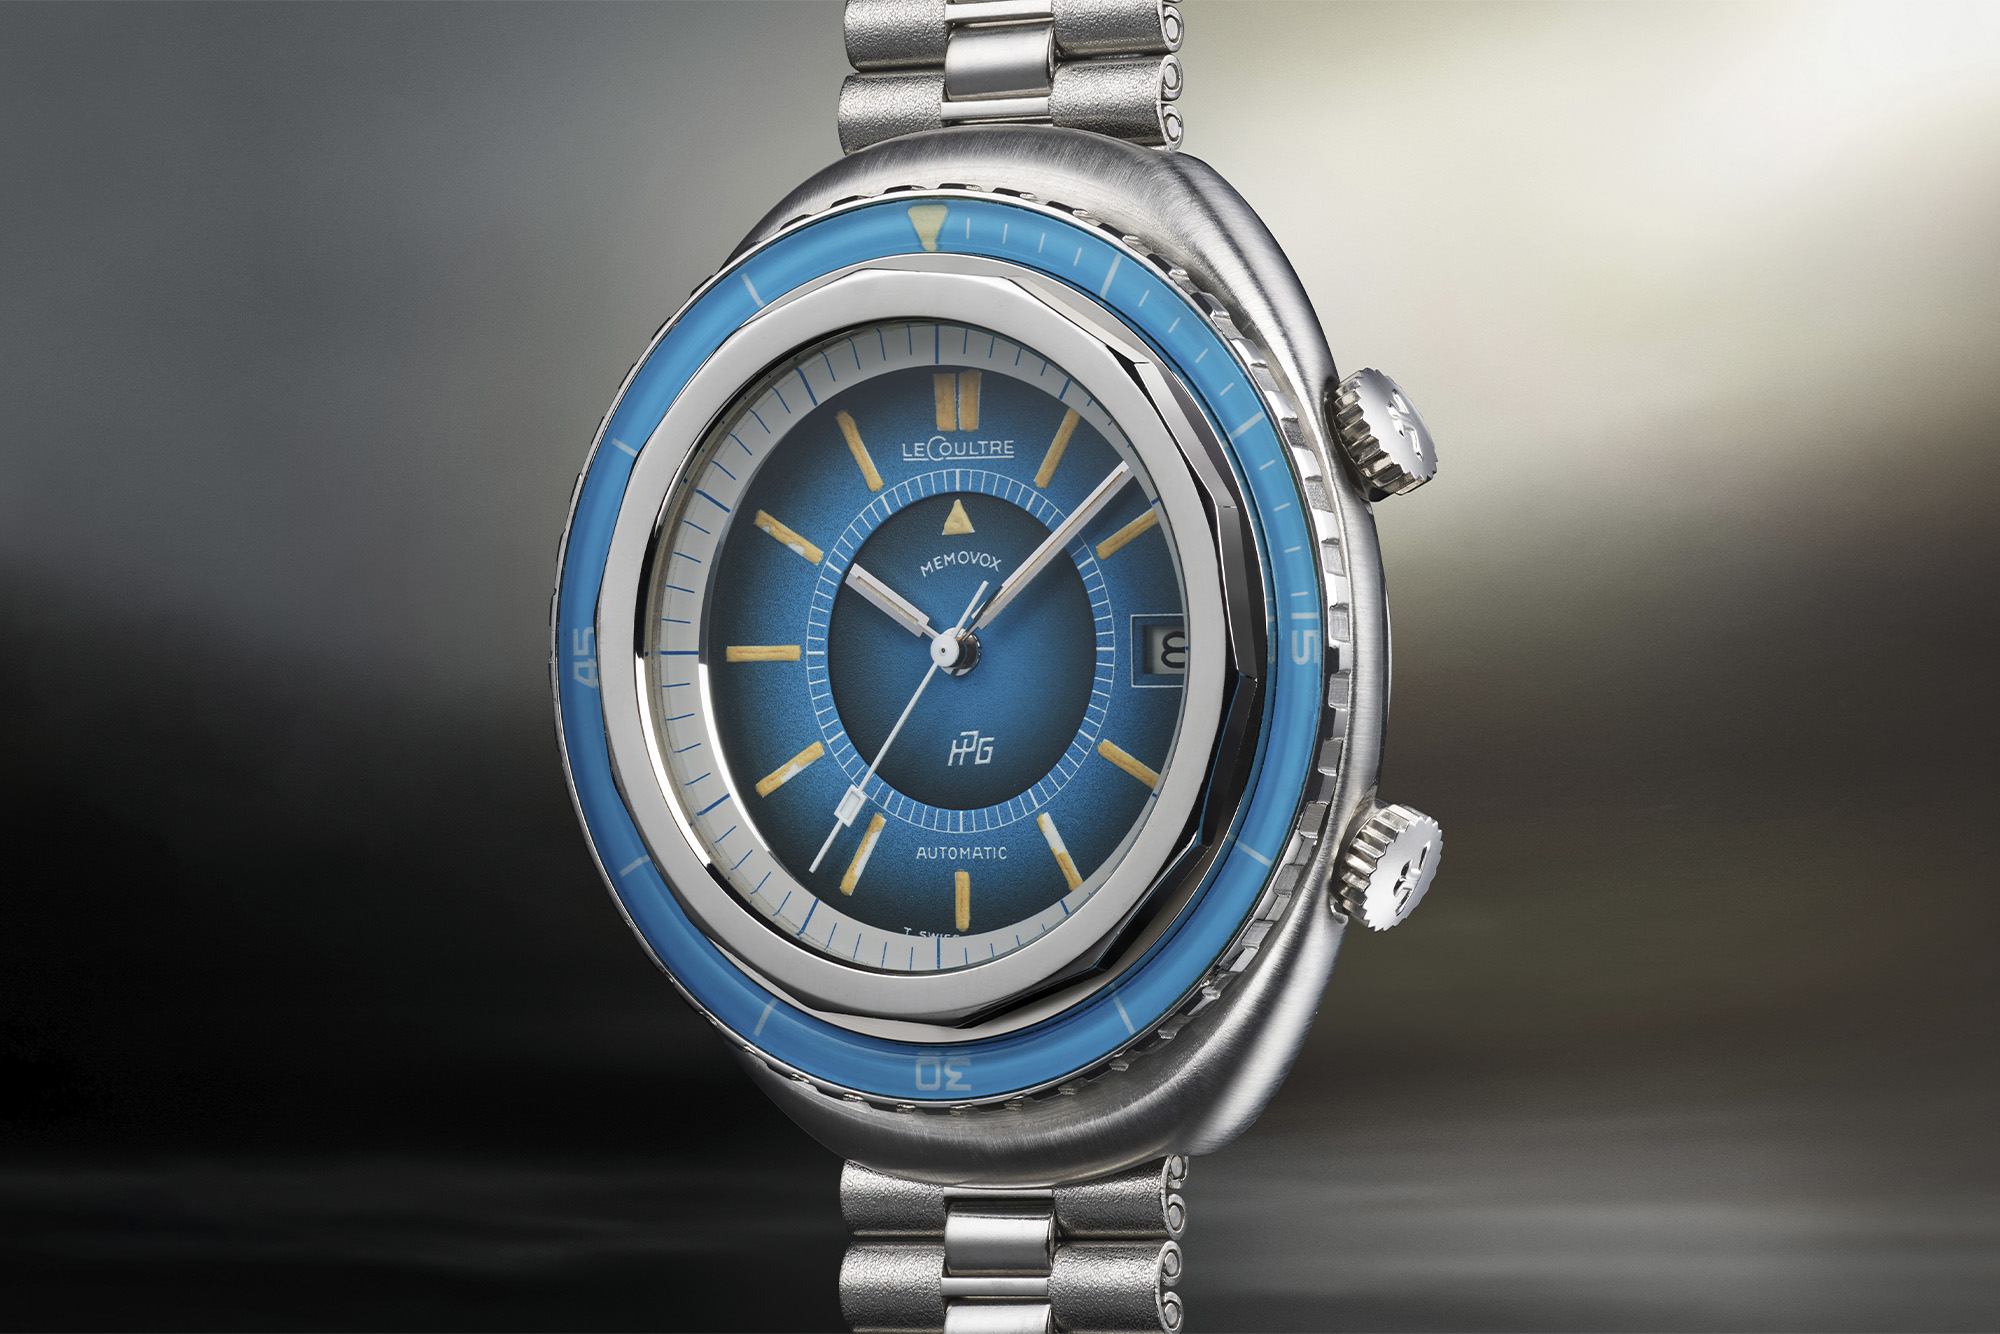 Jaeger-LeCoultre watch dial in blue with steel band